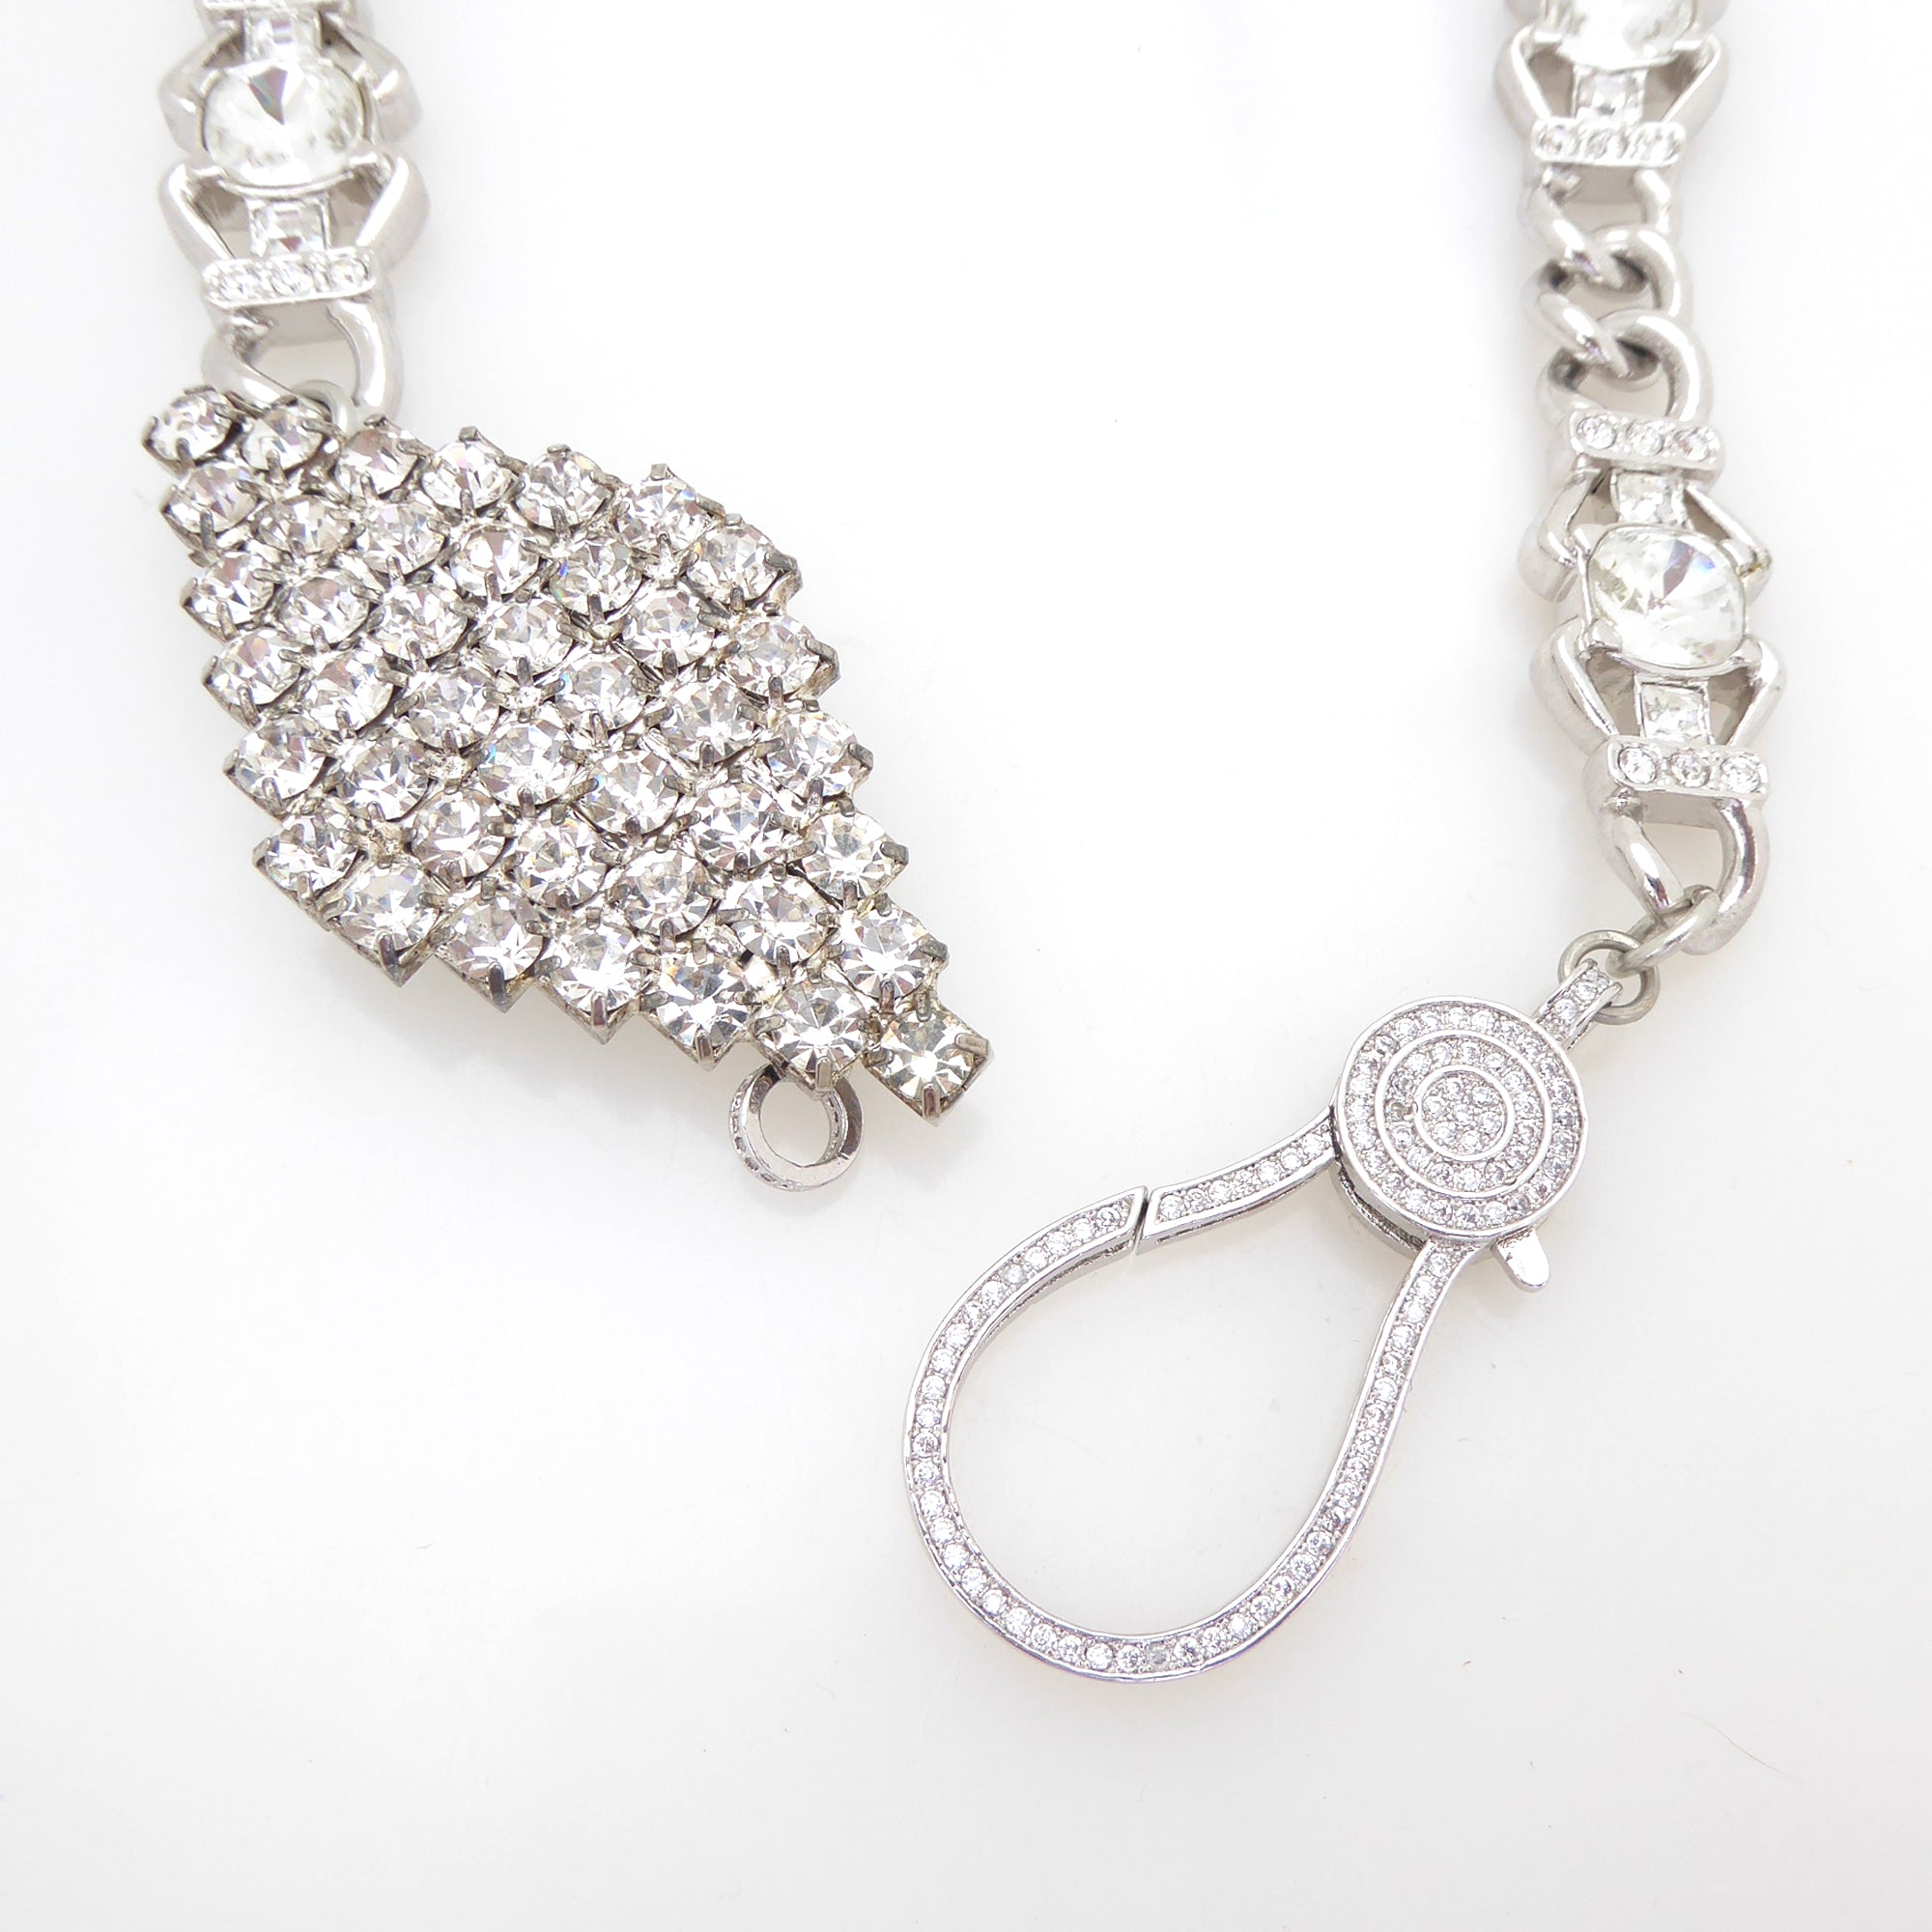 Ghiaccio silver rhinestone link and clasp necklace by Jenny Dayco 7